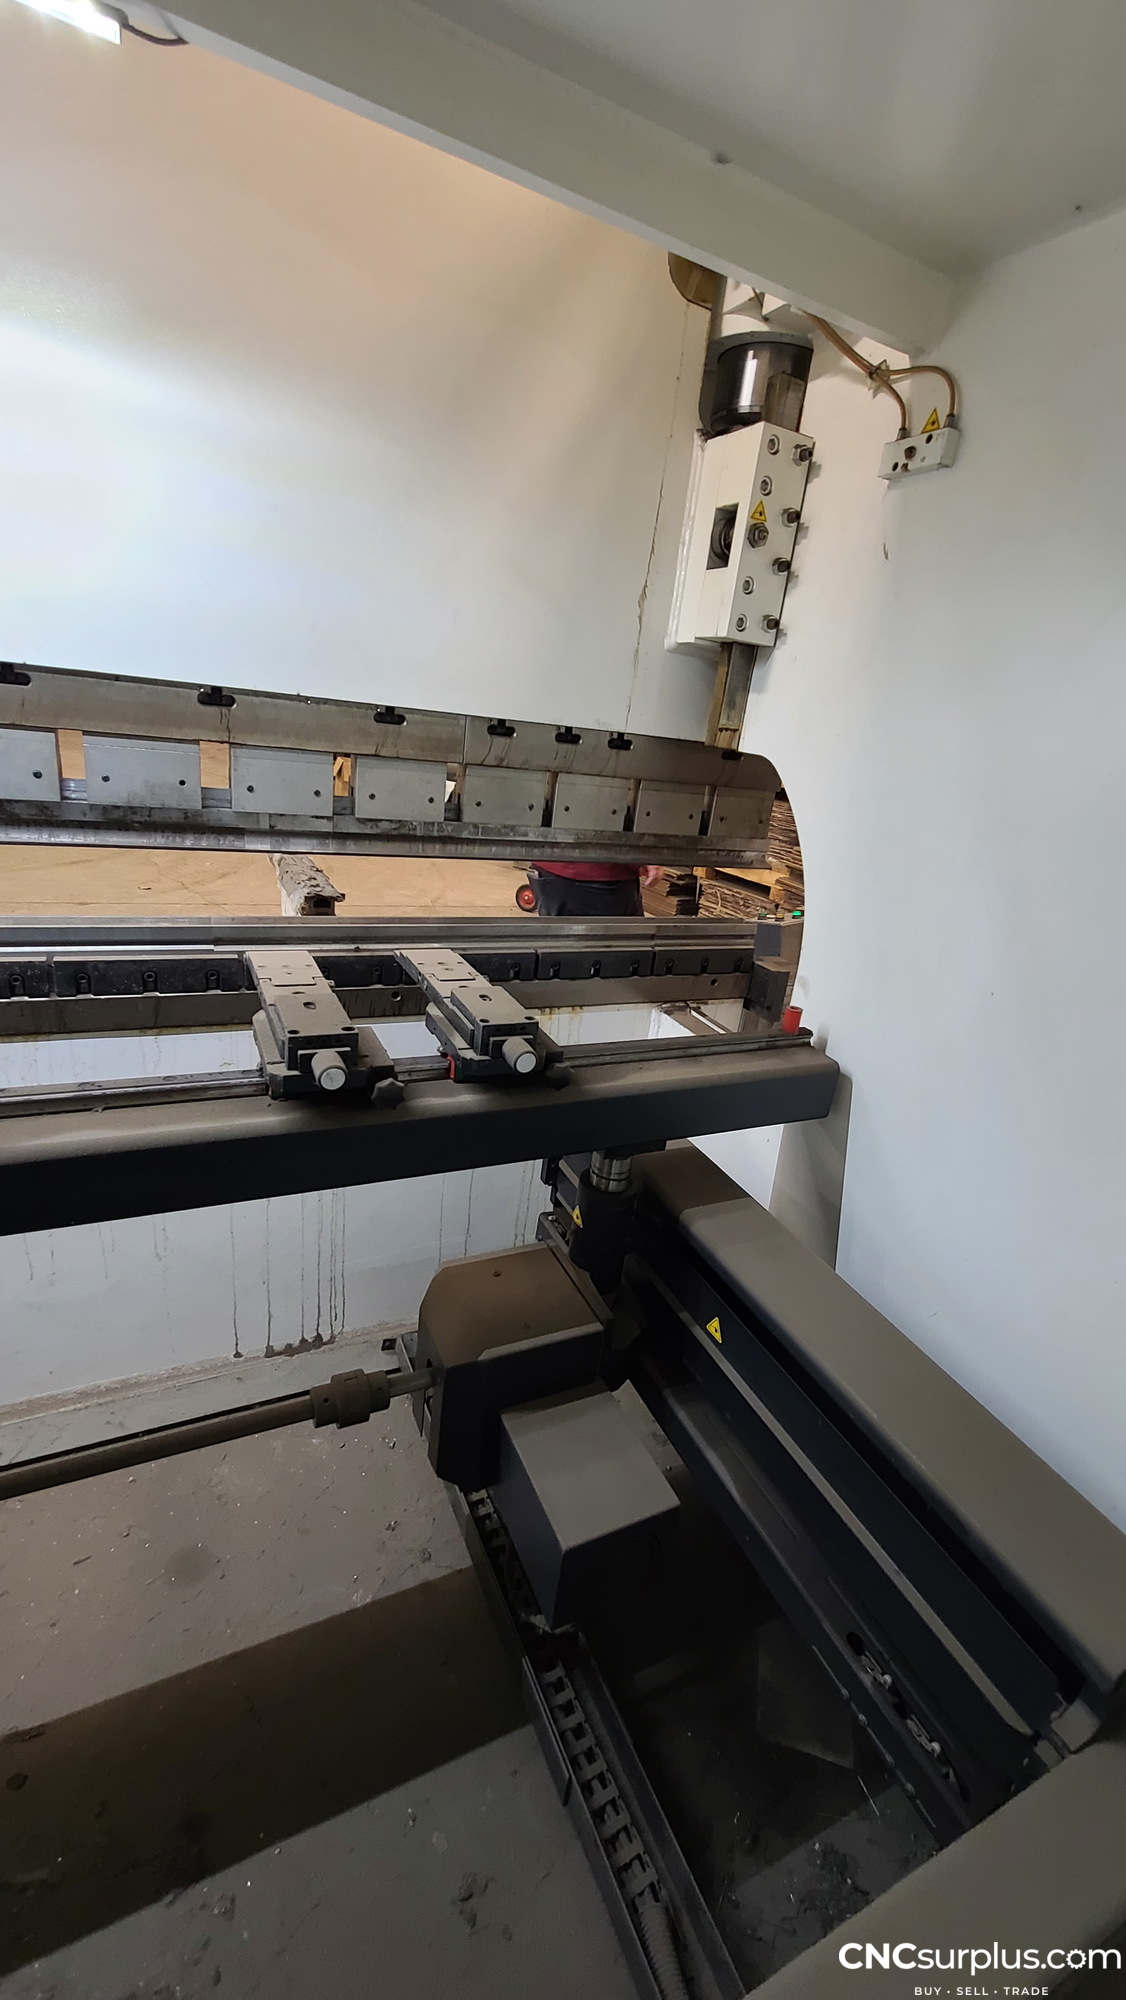 2014 BAYKAL APHS 37160 Press Brakes | CNCsurplus, A Div. of Comtex Leasing Corp.